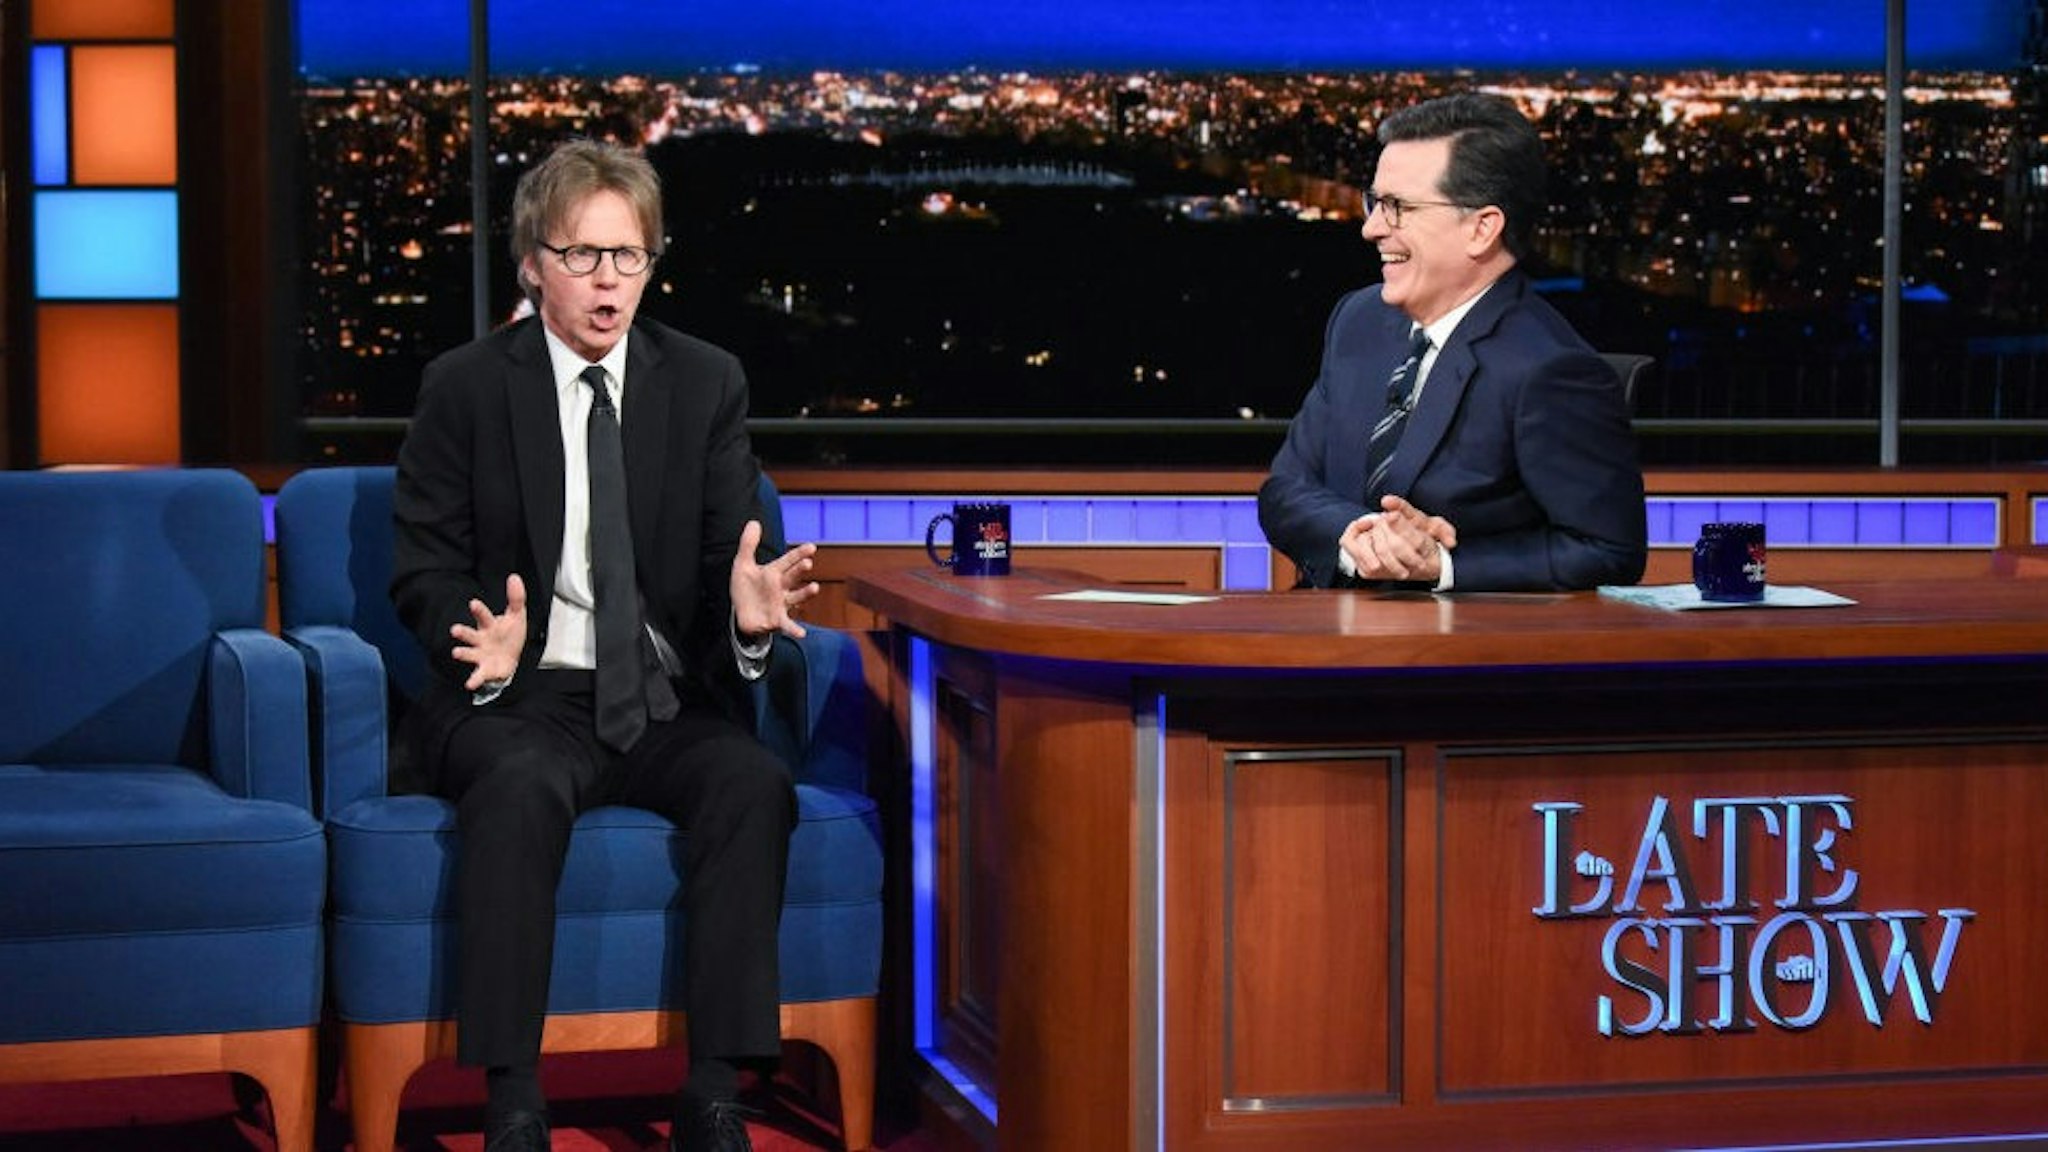 NEW YORK - MARCH 28: The Late Show with Stephen Colbert and guest Dana Carvey during Wednesday's March 28, 2018 show. (Photo by